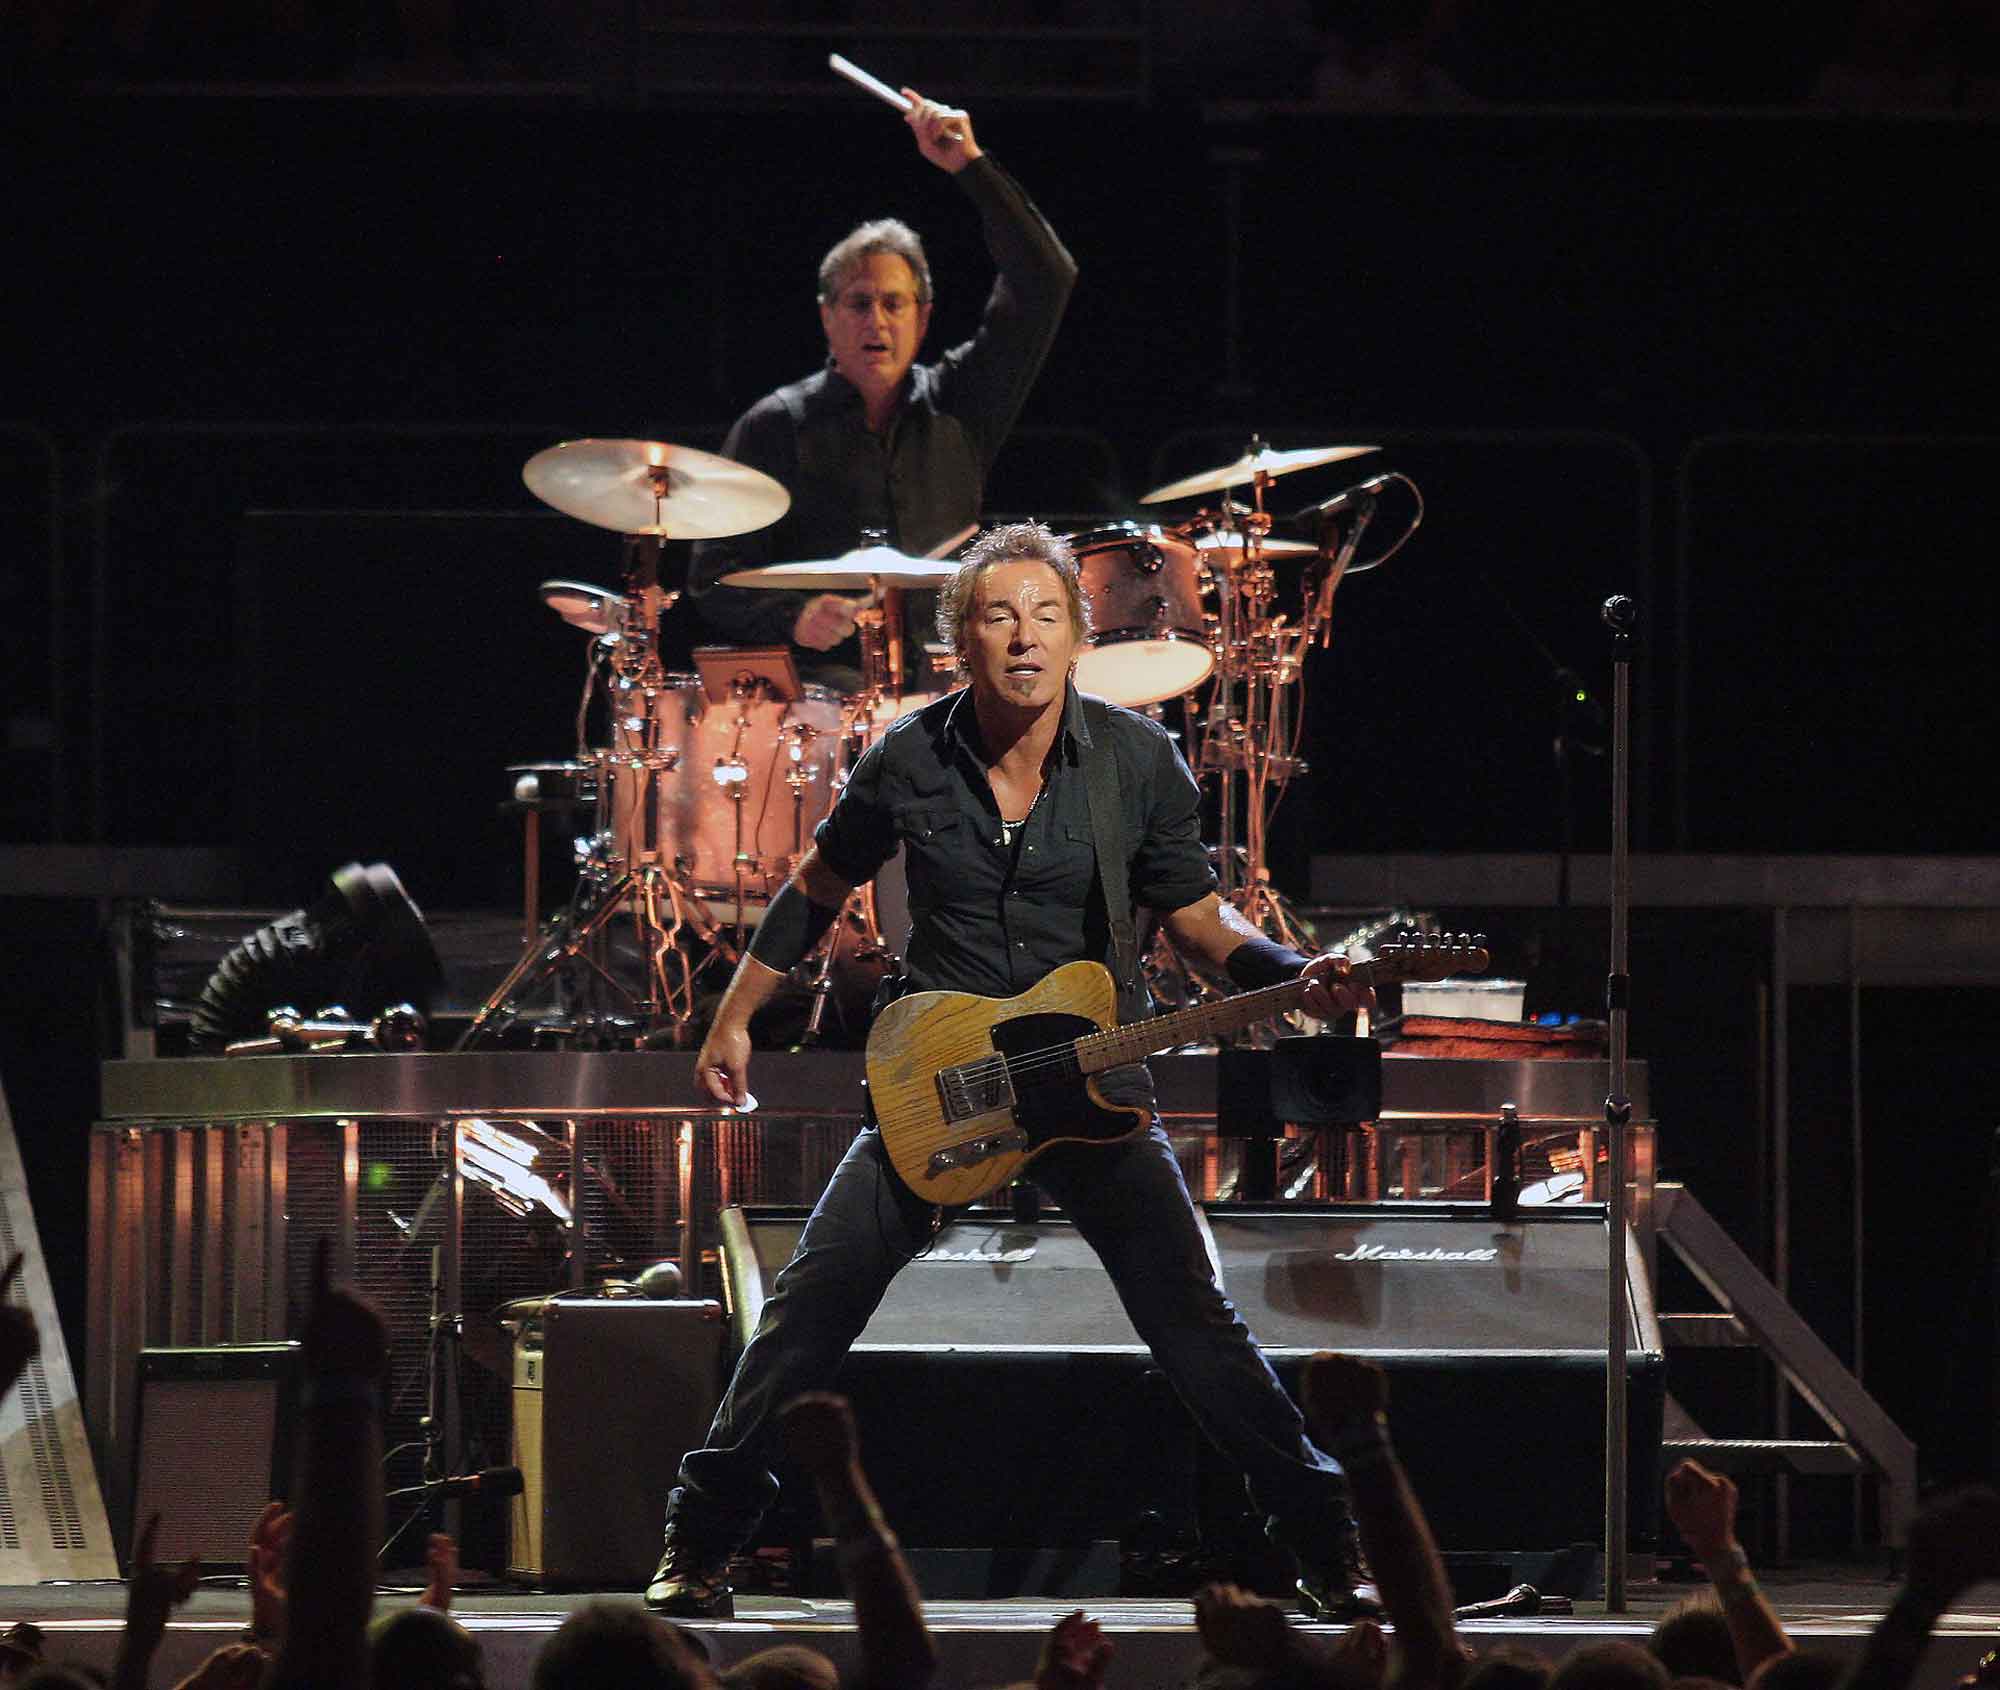 Video Of The Bruce Springsteen Super Bowl Halftime Show (2009)